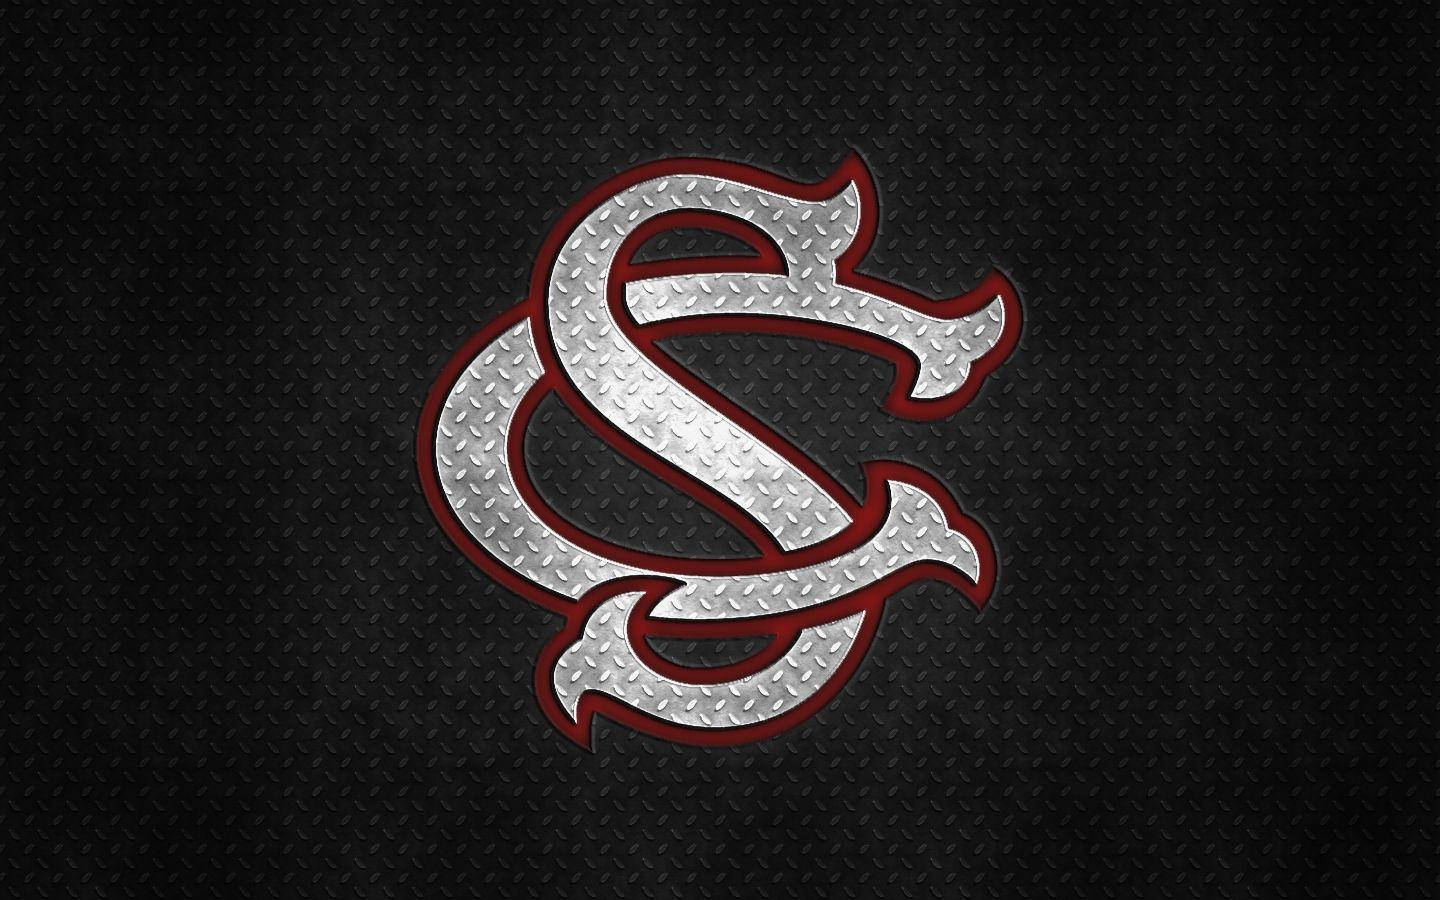 The iconic intertwined letters logo of University of South Carolina. Wallpaper